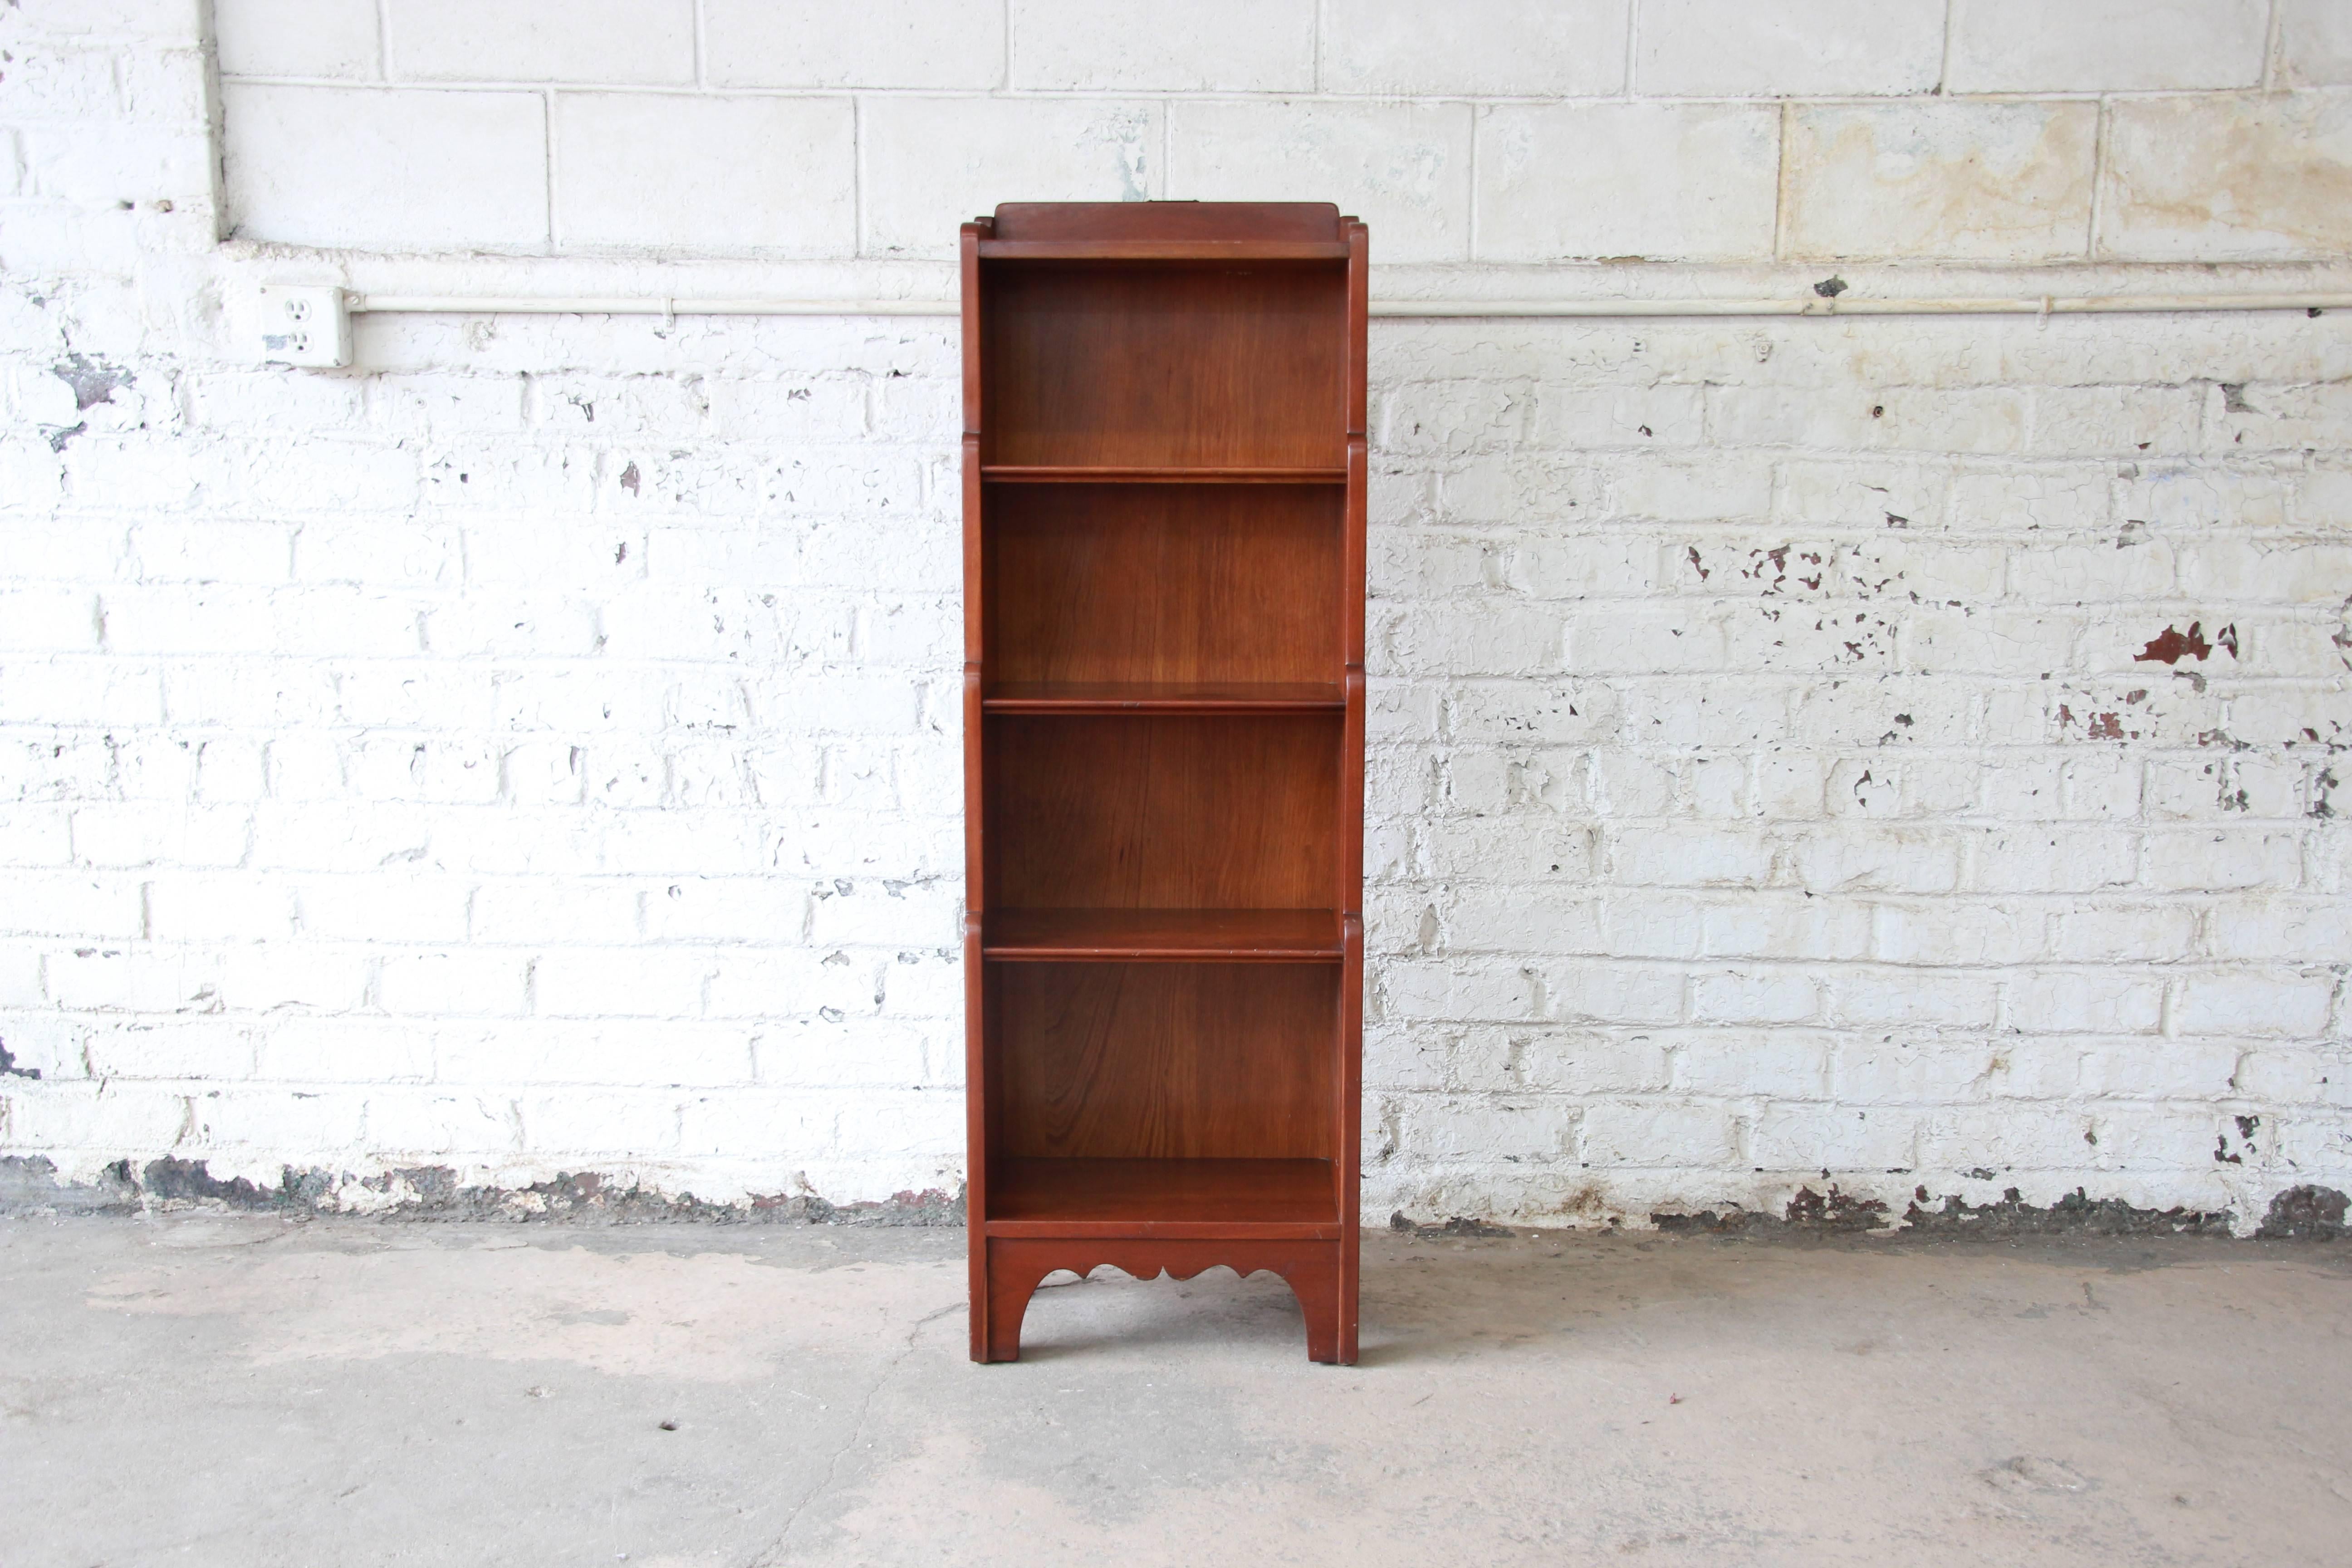 An excellent cherrywood graduated bookcase designed by Leopold Stickley. The bookcase features beautiful cherrywood grain and solid wood construction. Original Stickley branded label and Leopold Stickley paper label are present. The label is date